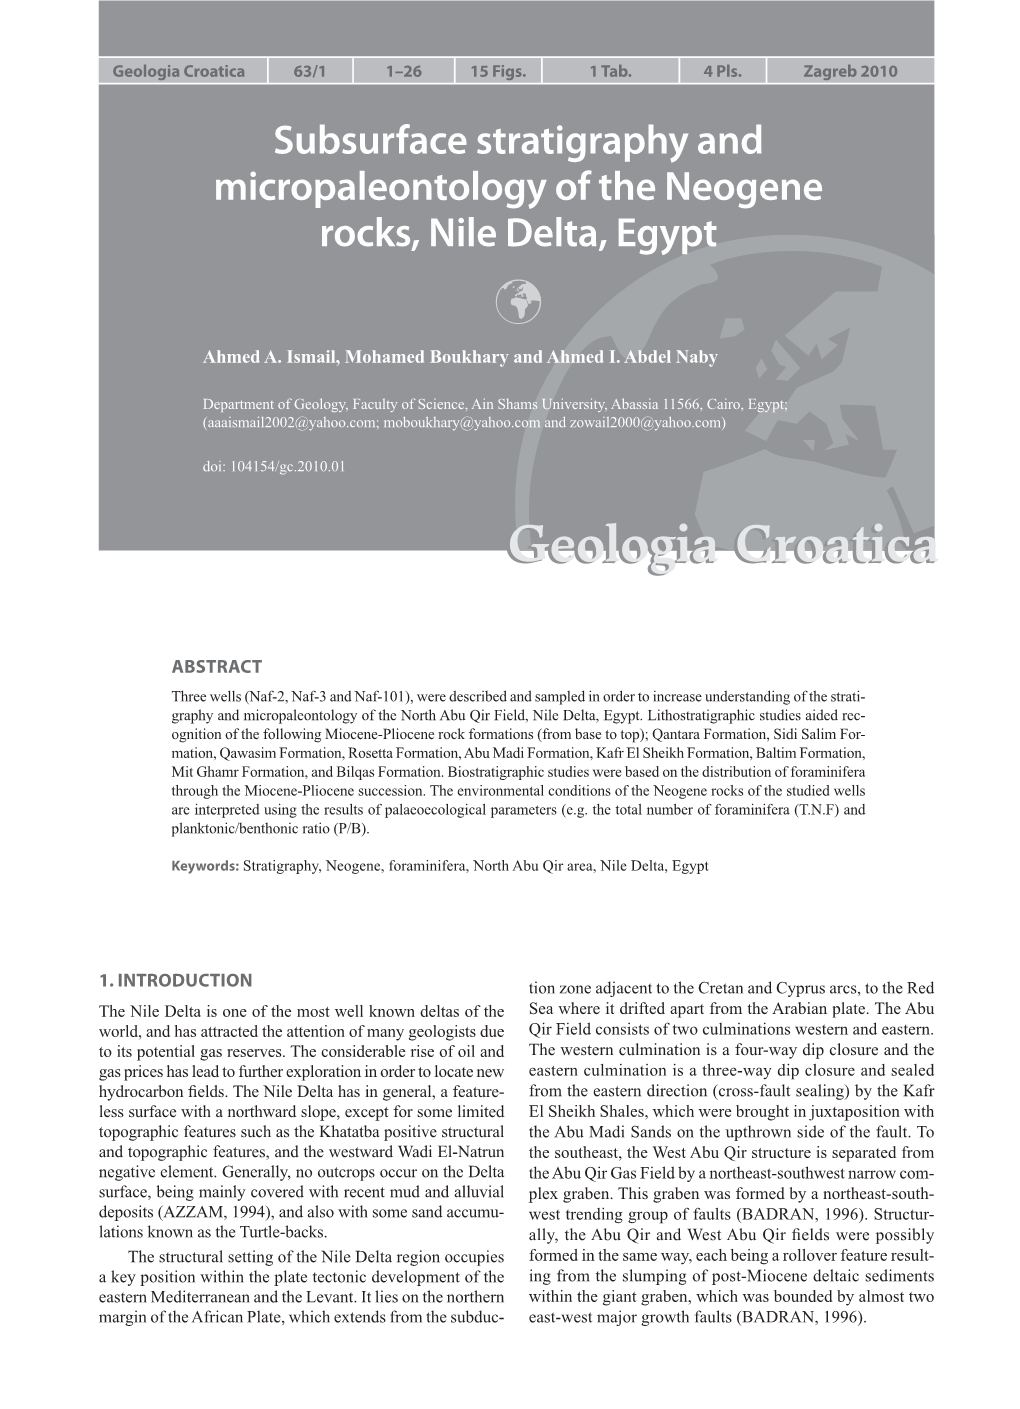 Subsurface Stratigraphy and Micropaleontology of the Neogene Rocks, Nile Delta, Egypt 